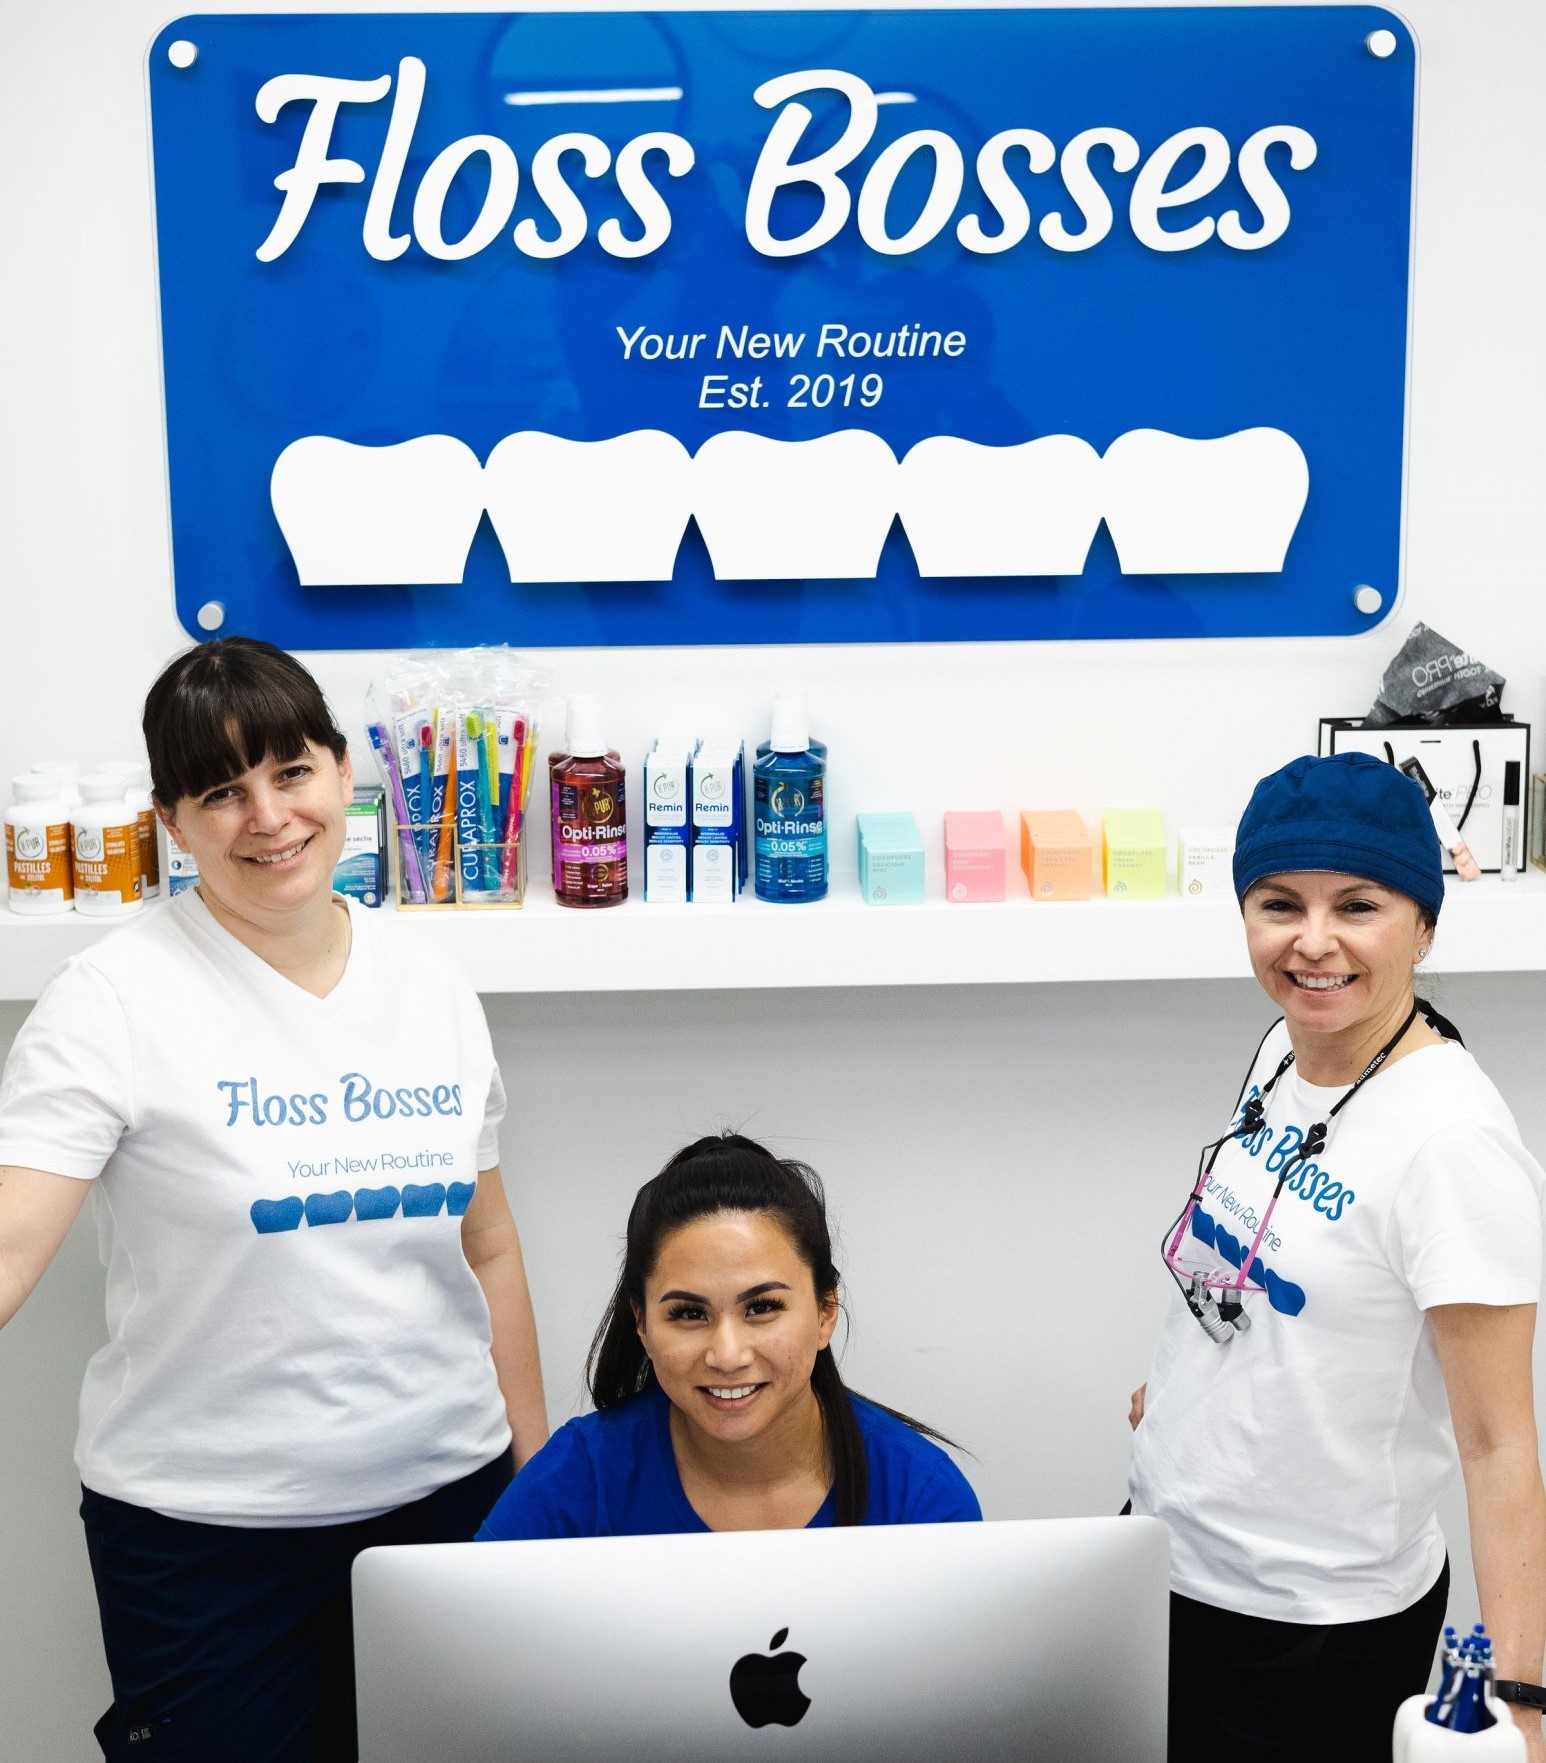 about floss bosses